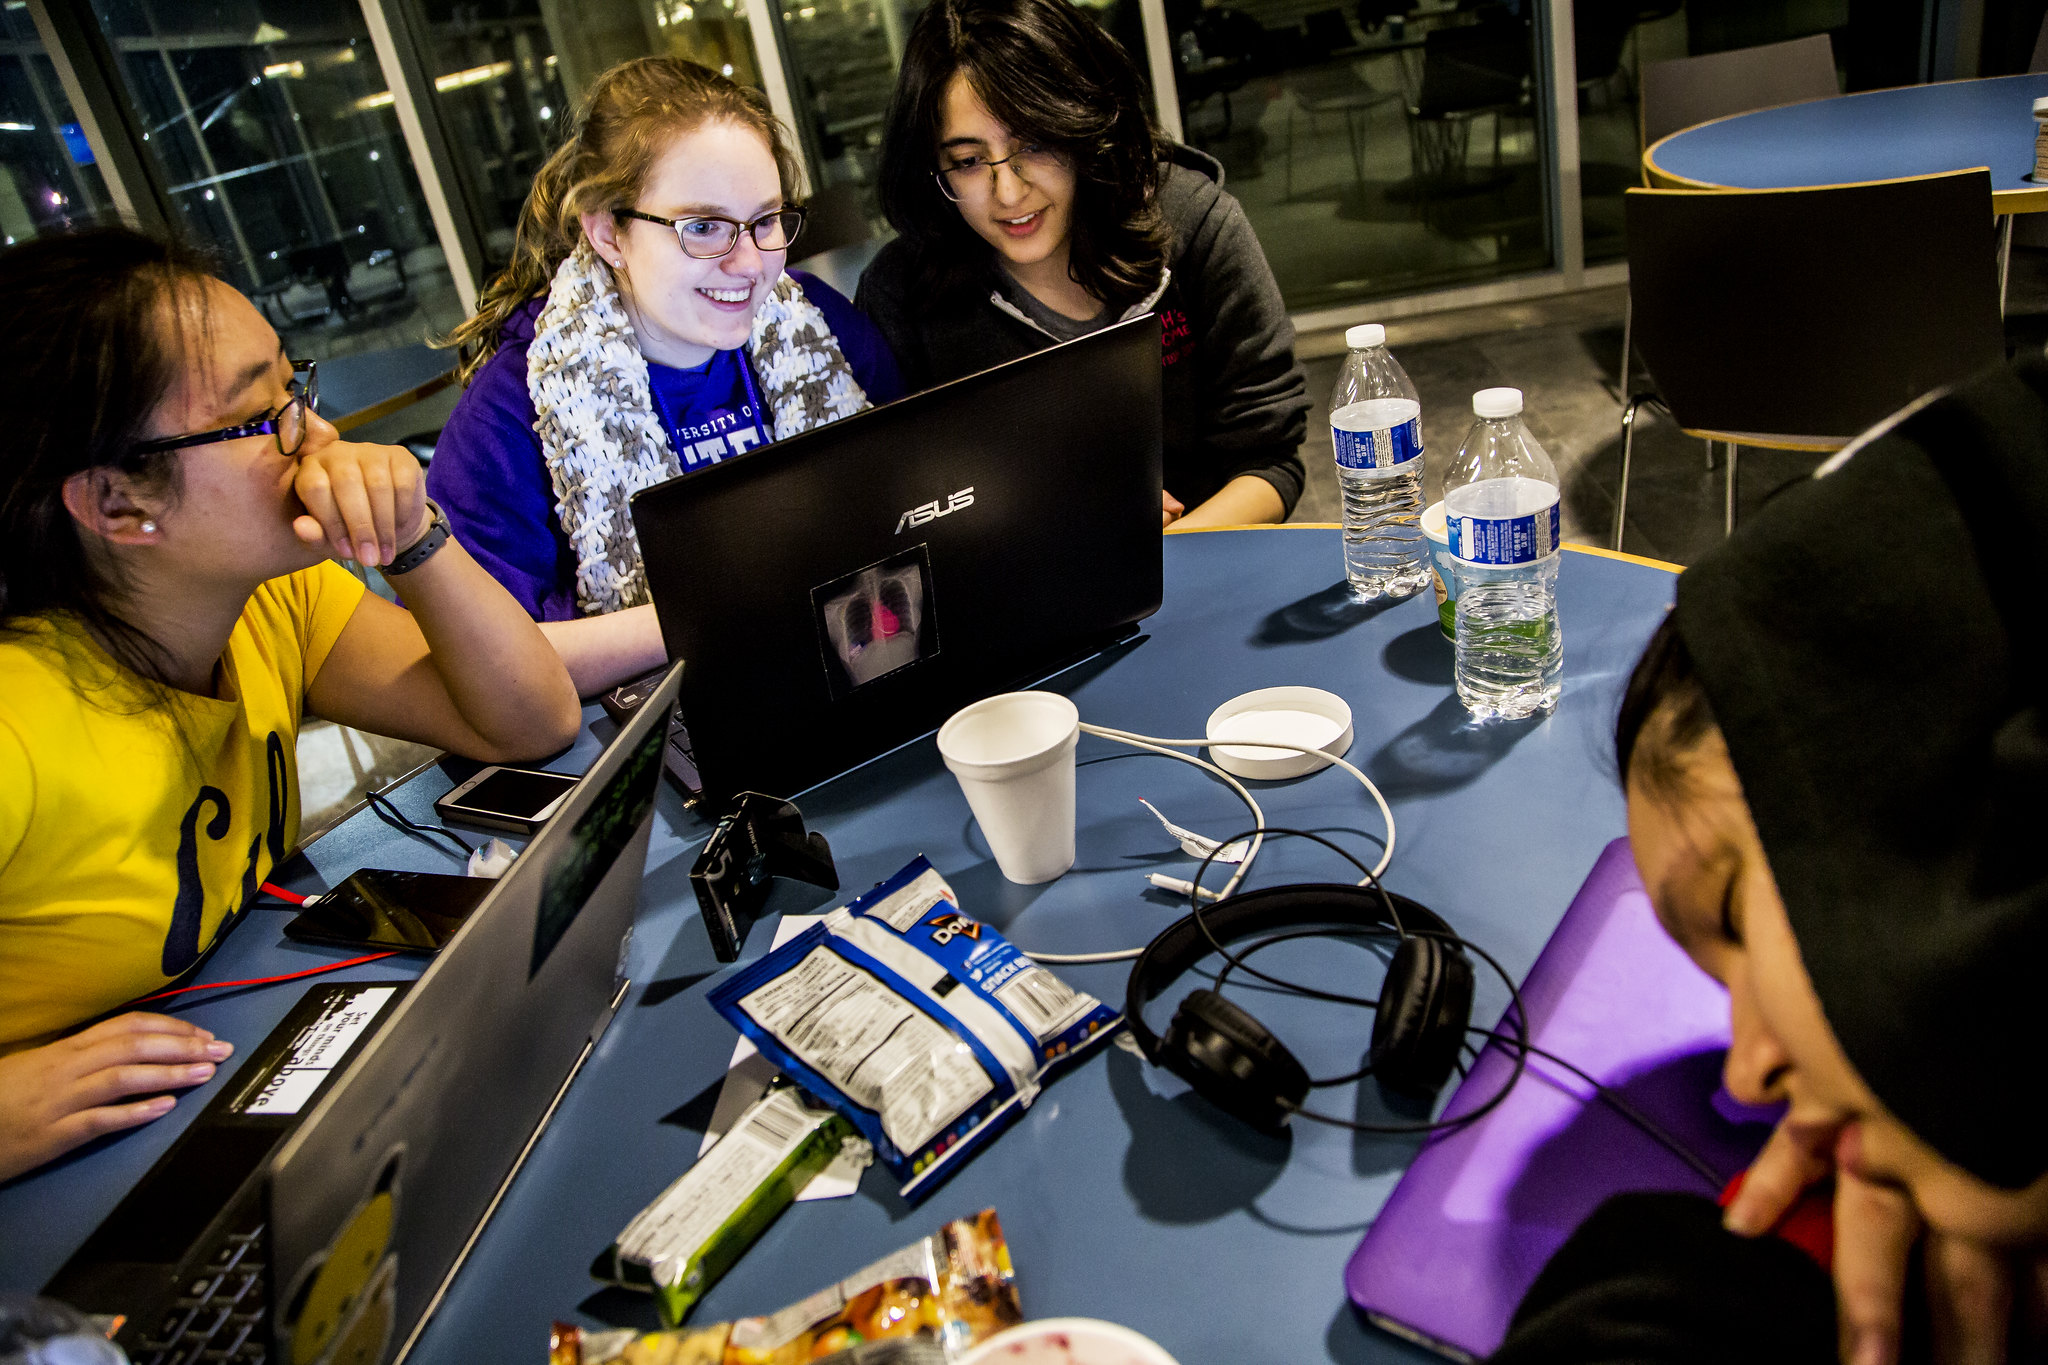 Three female students work on computers, smiling.